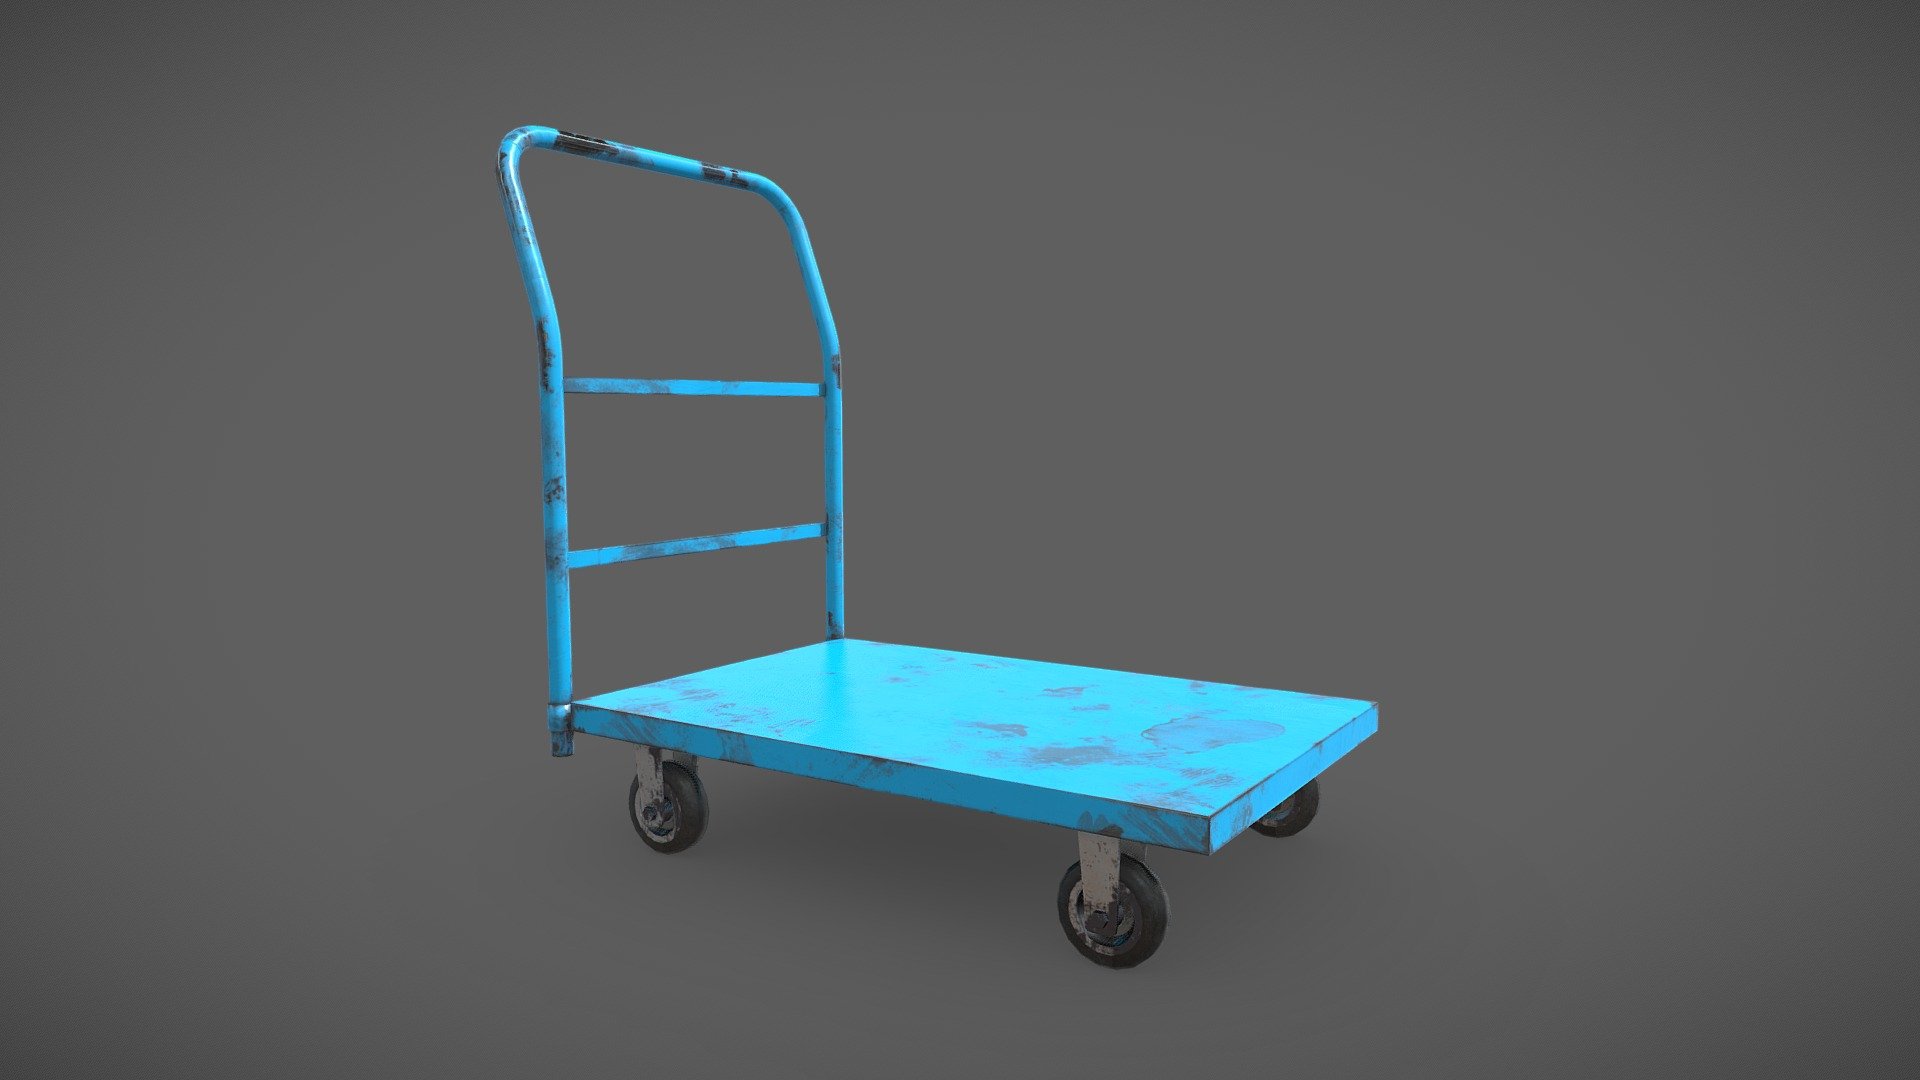 Industrial Trolley Lowpoly PBR model - ready for use in AR, VR, Realtime Visualizations &amp; Games with 4K Textures 3d model